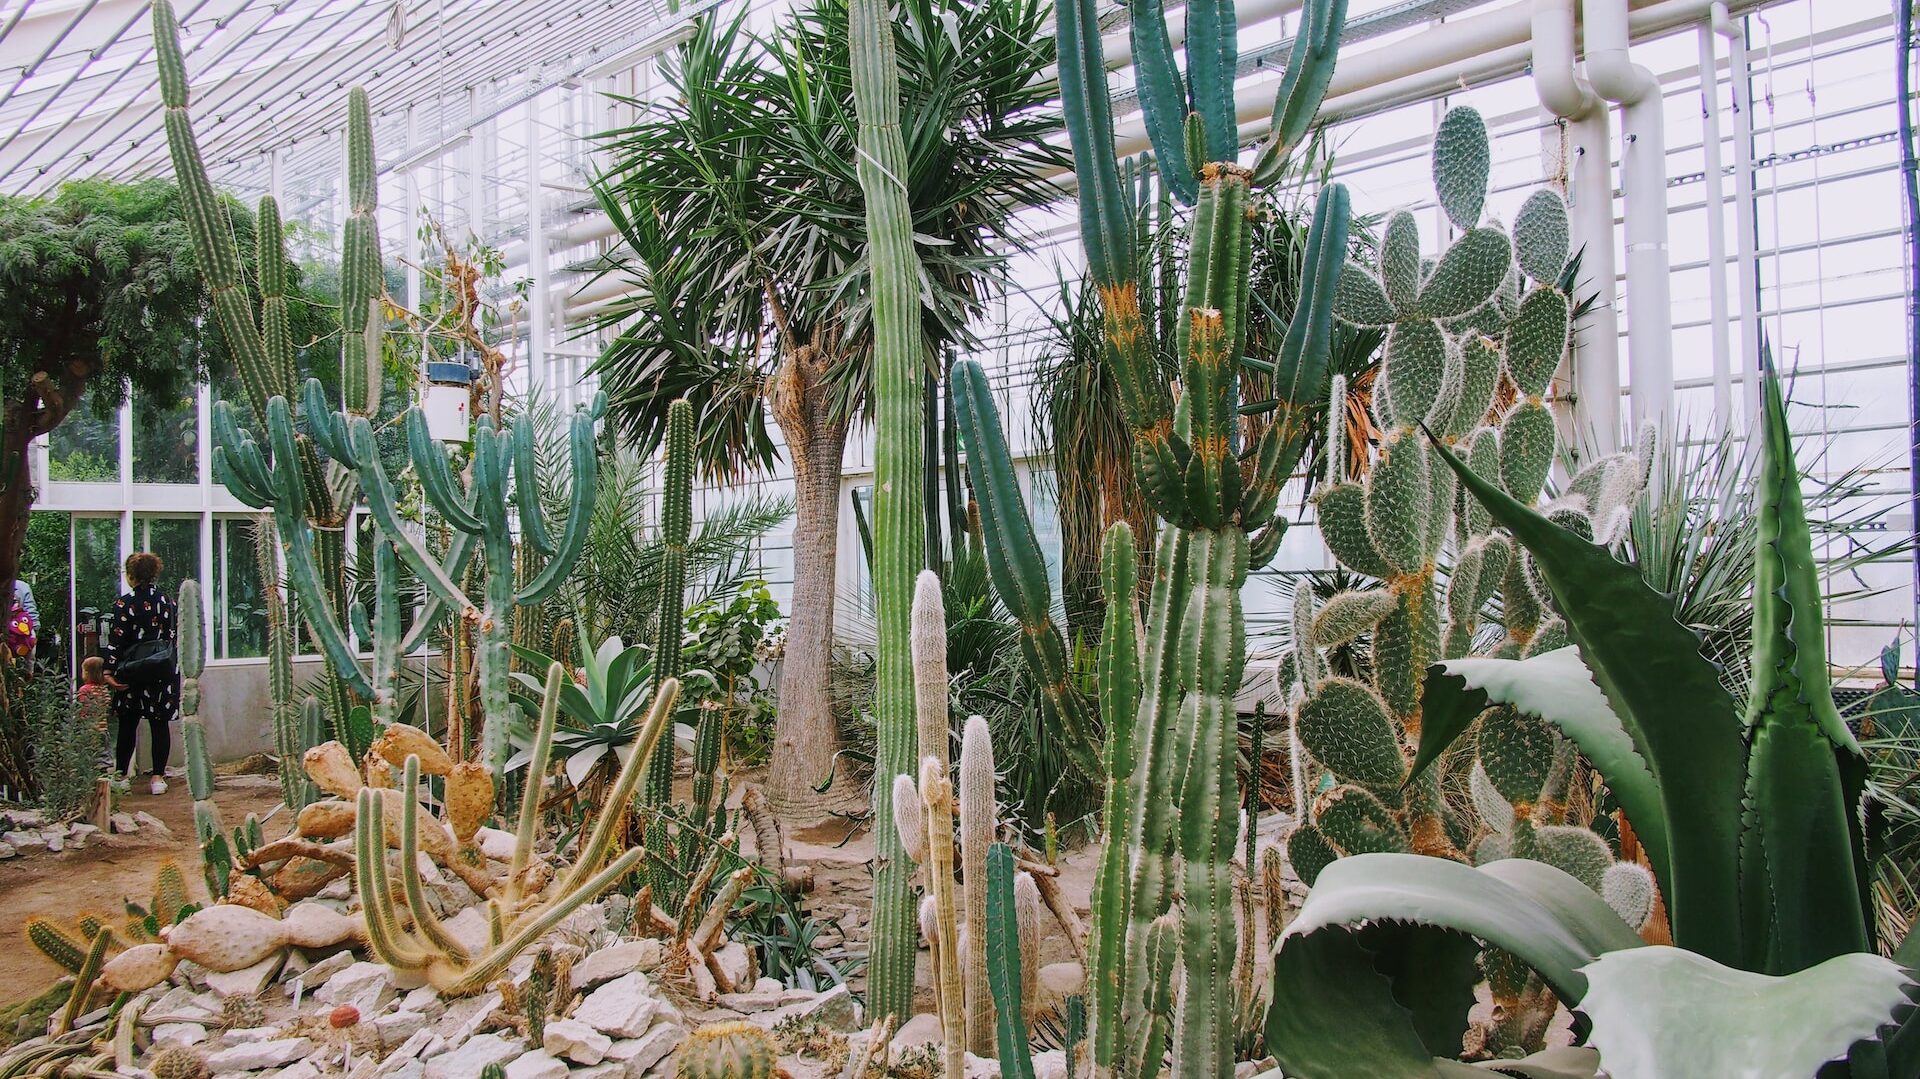 Seeing the Botanical Garden is one of the most epic things to do in Aarhus.